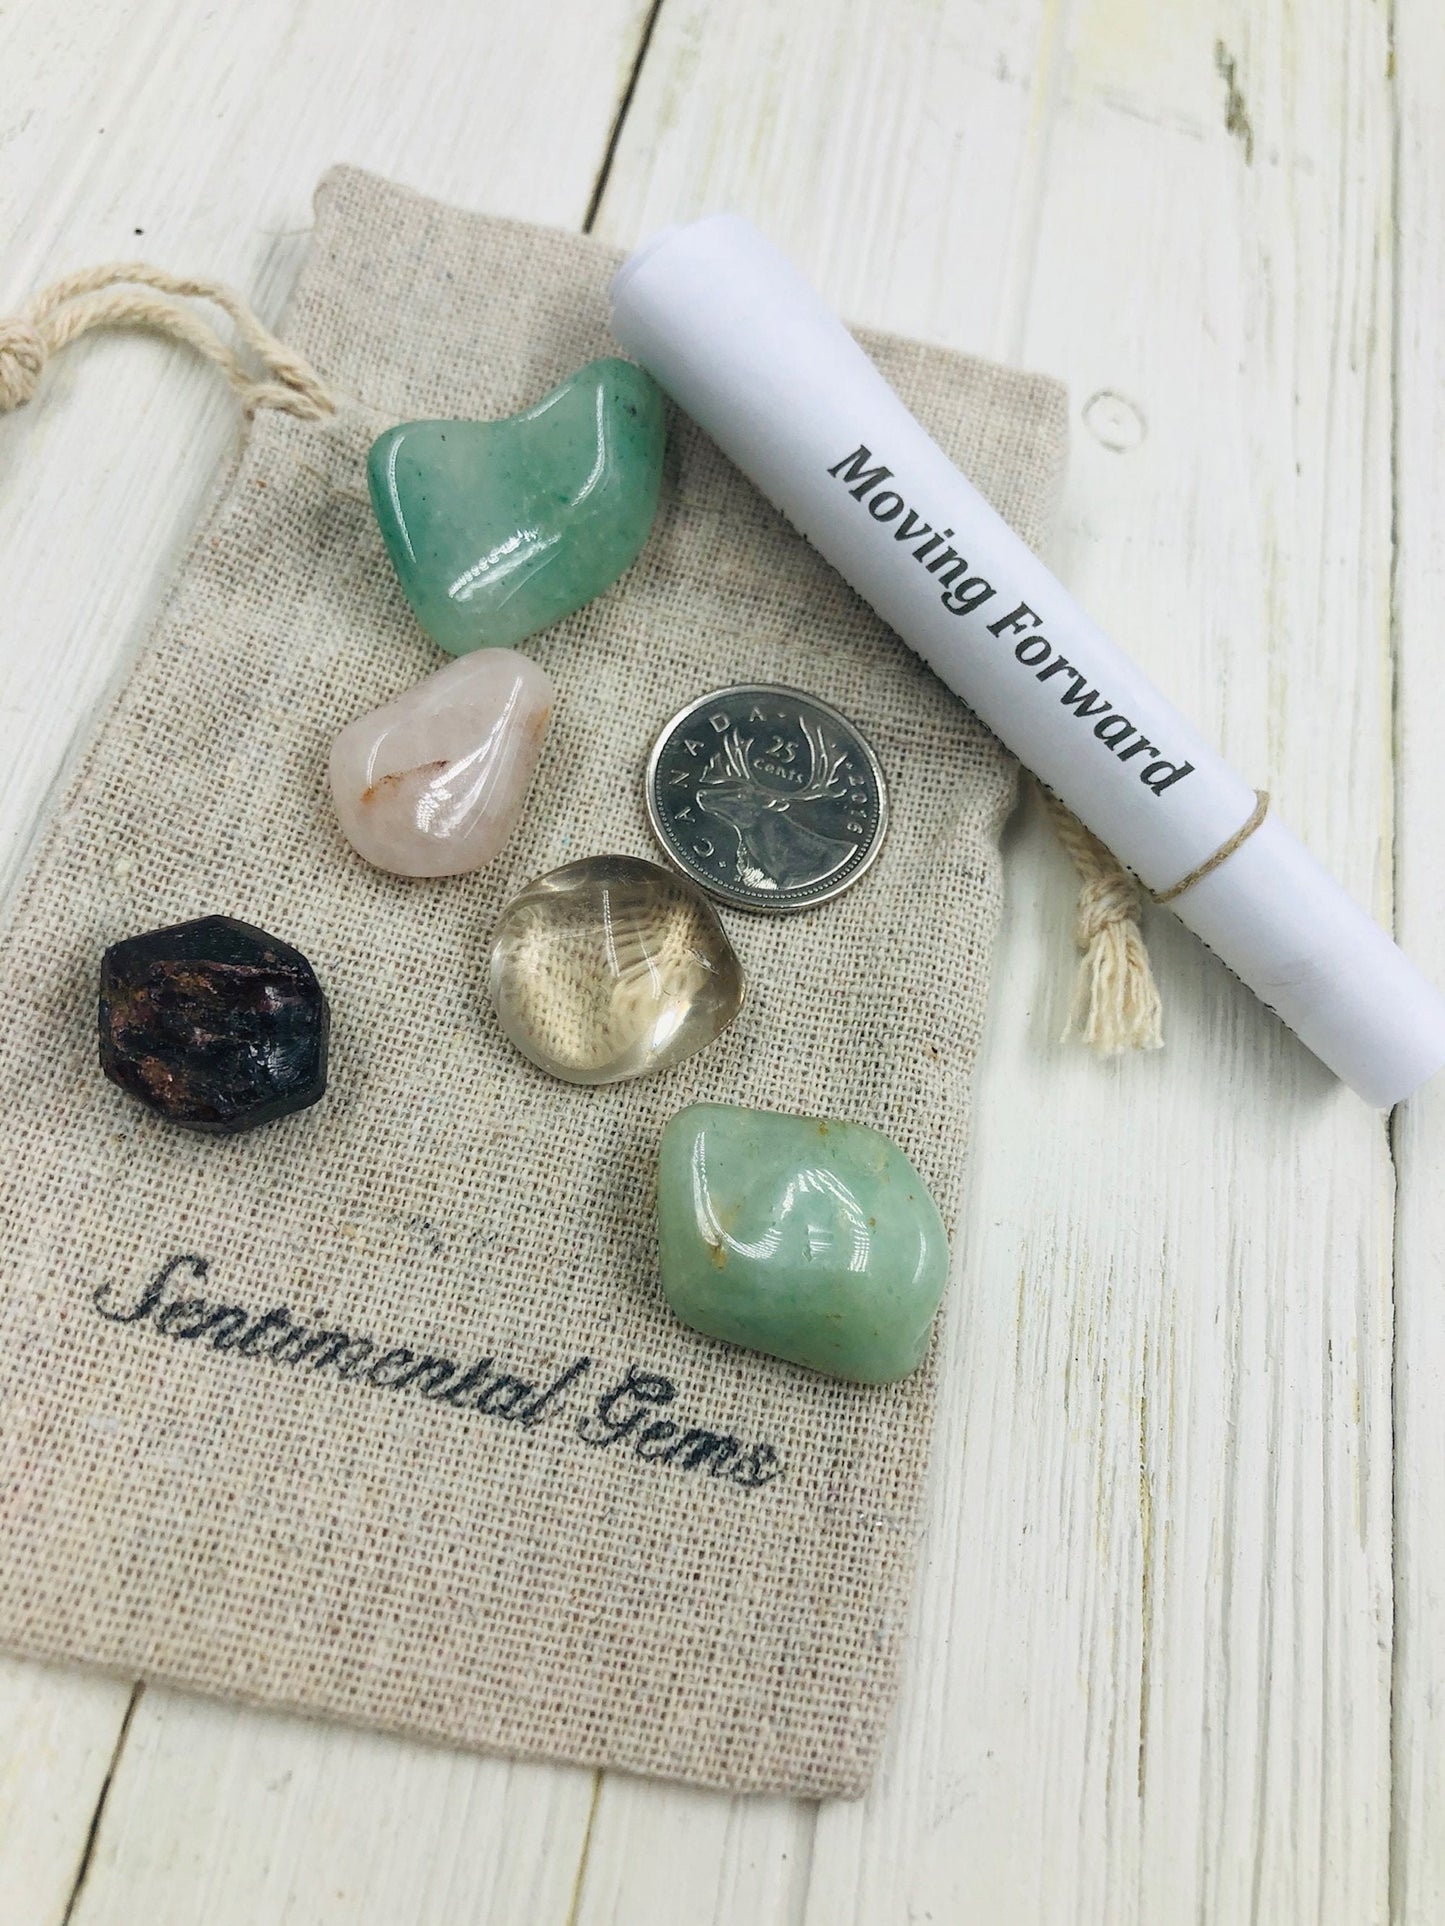 Sentimental Gems Crystals for Moving Forward Collection